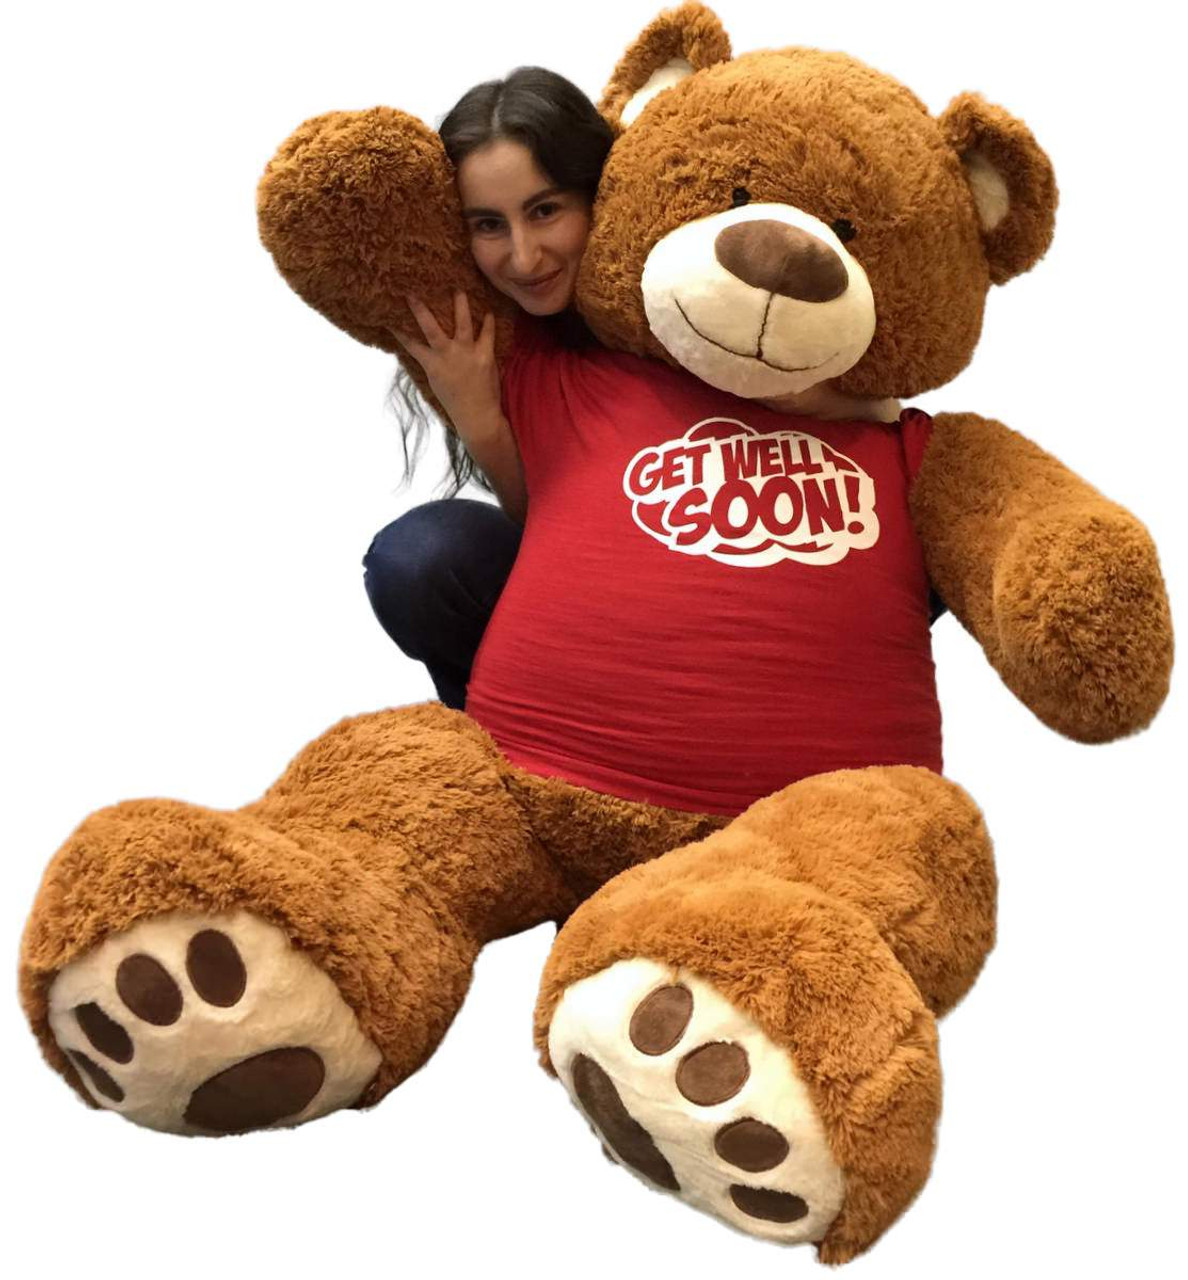 5 Foot Giant Teddy Bear 60 Inches Soft Cinnamon Brown Color Wears